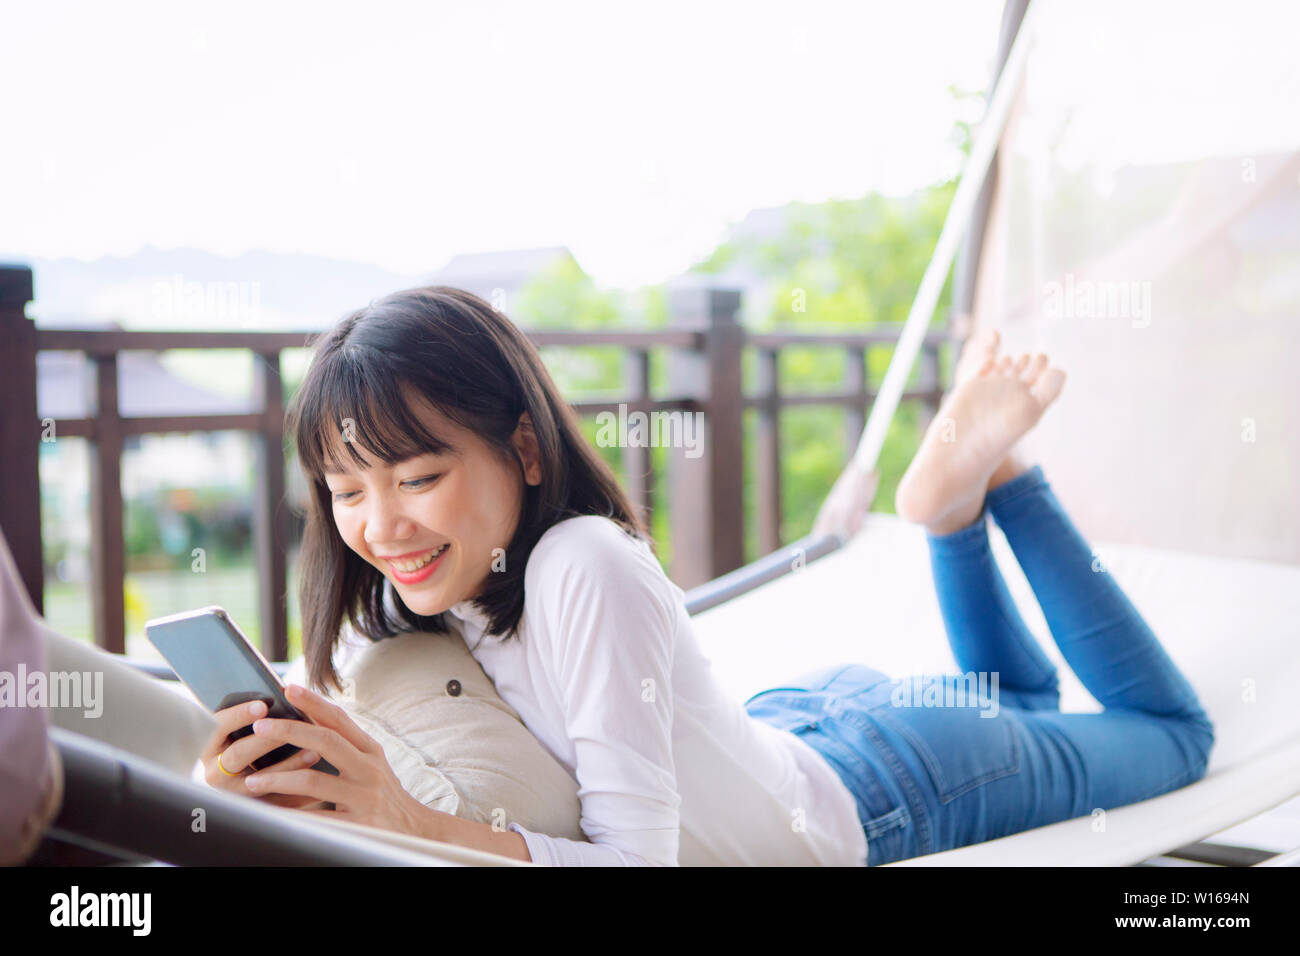 asian younger woman toothy smiling with happiness holding smart phone in hand ,relaxing lifestyle Stock Photo